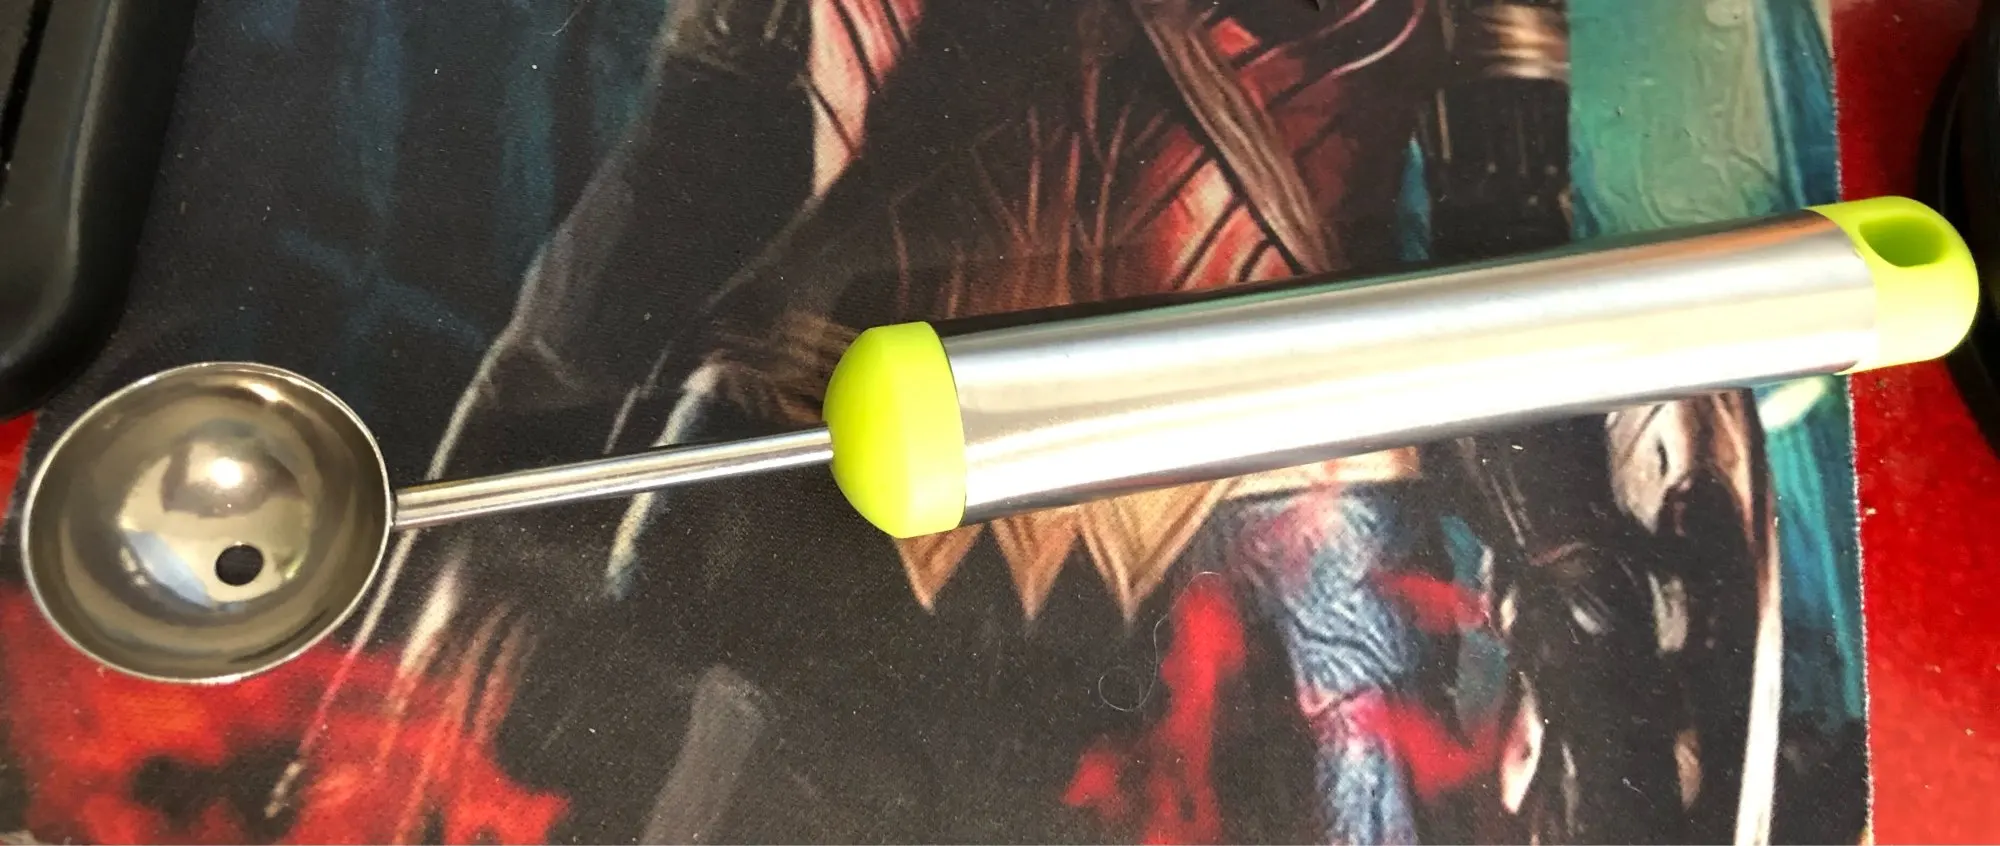 Melon Master Stainless Steel Ball Scoop photo review